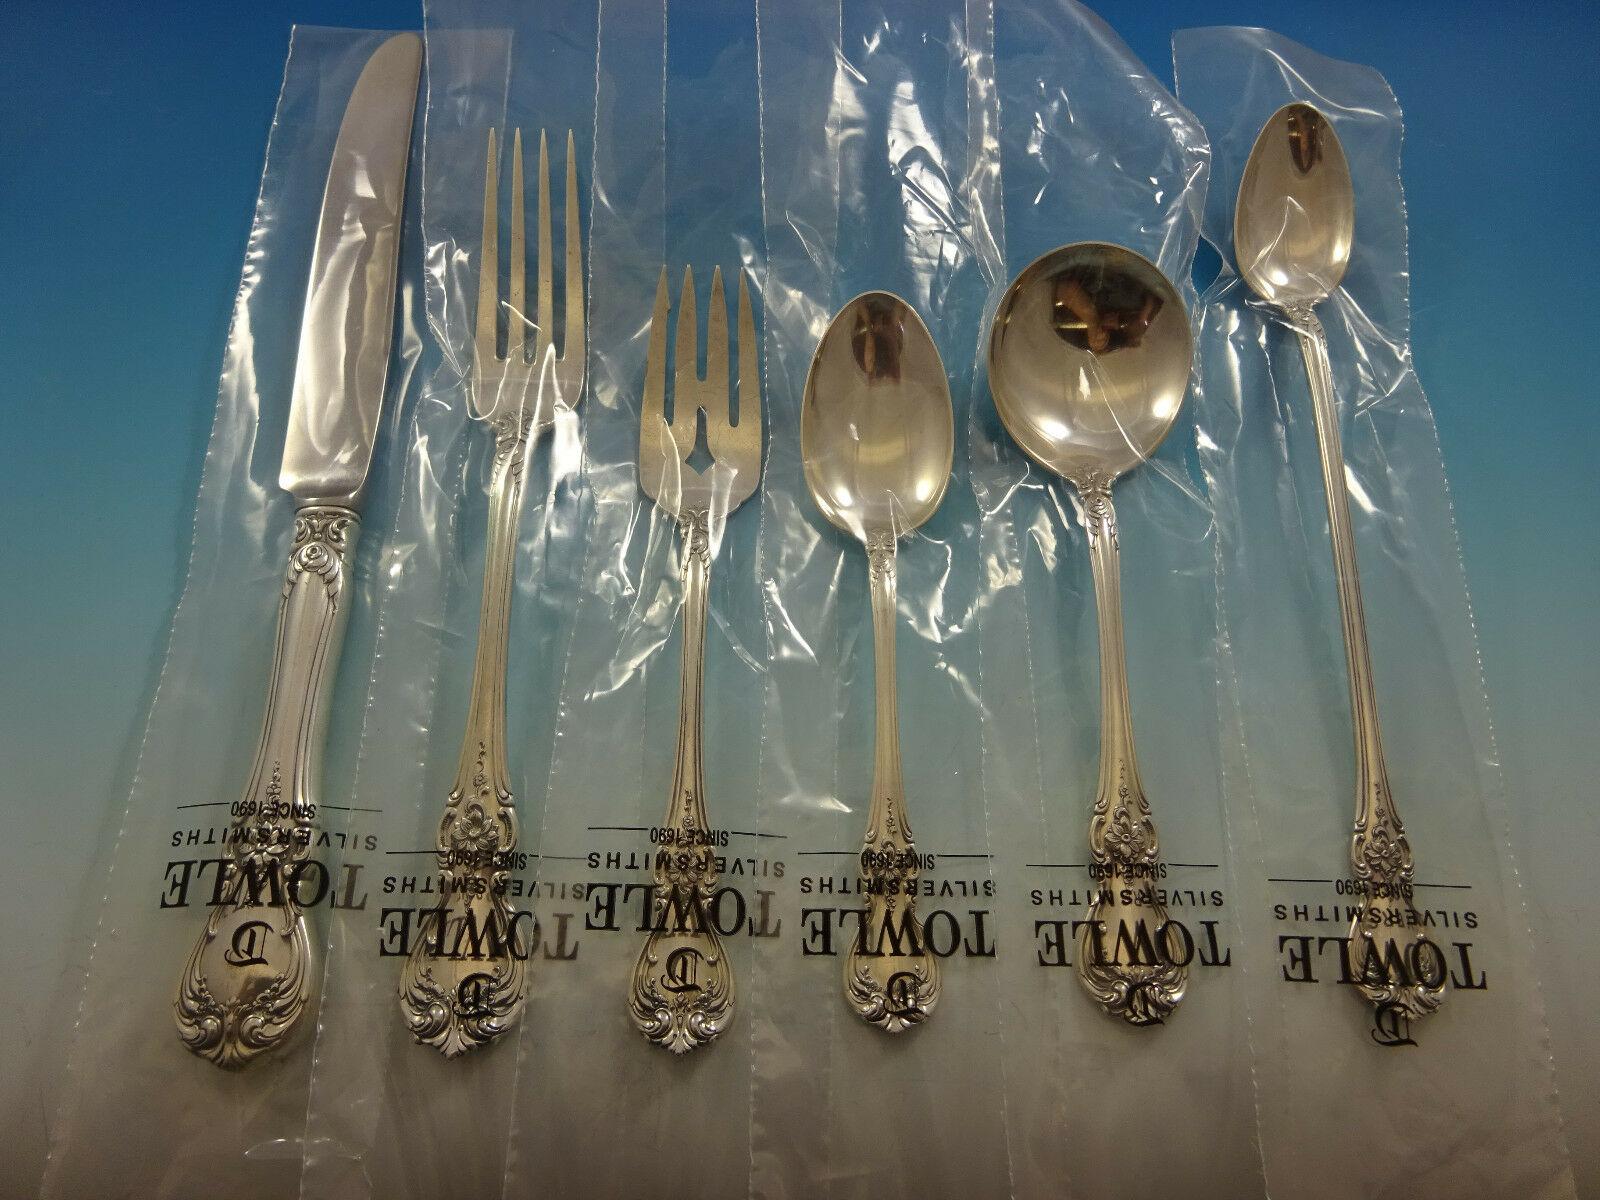 Old Master by Towle sterling silver dinner size flatware set, 55 pieces. This set includes:

8 dinner size knives, 9 5/8